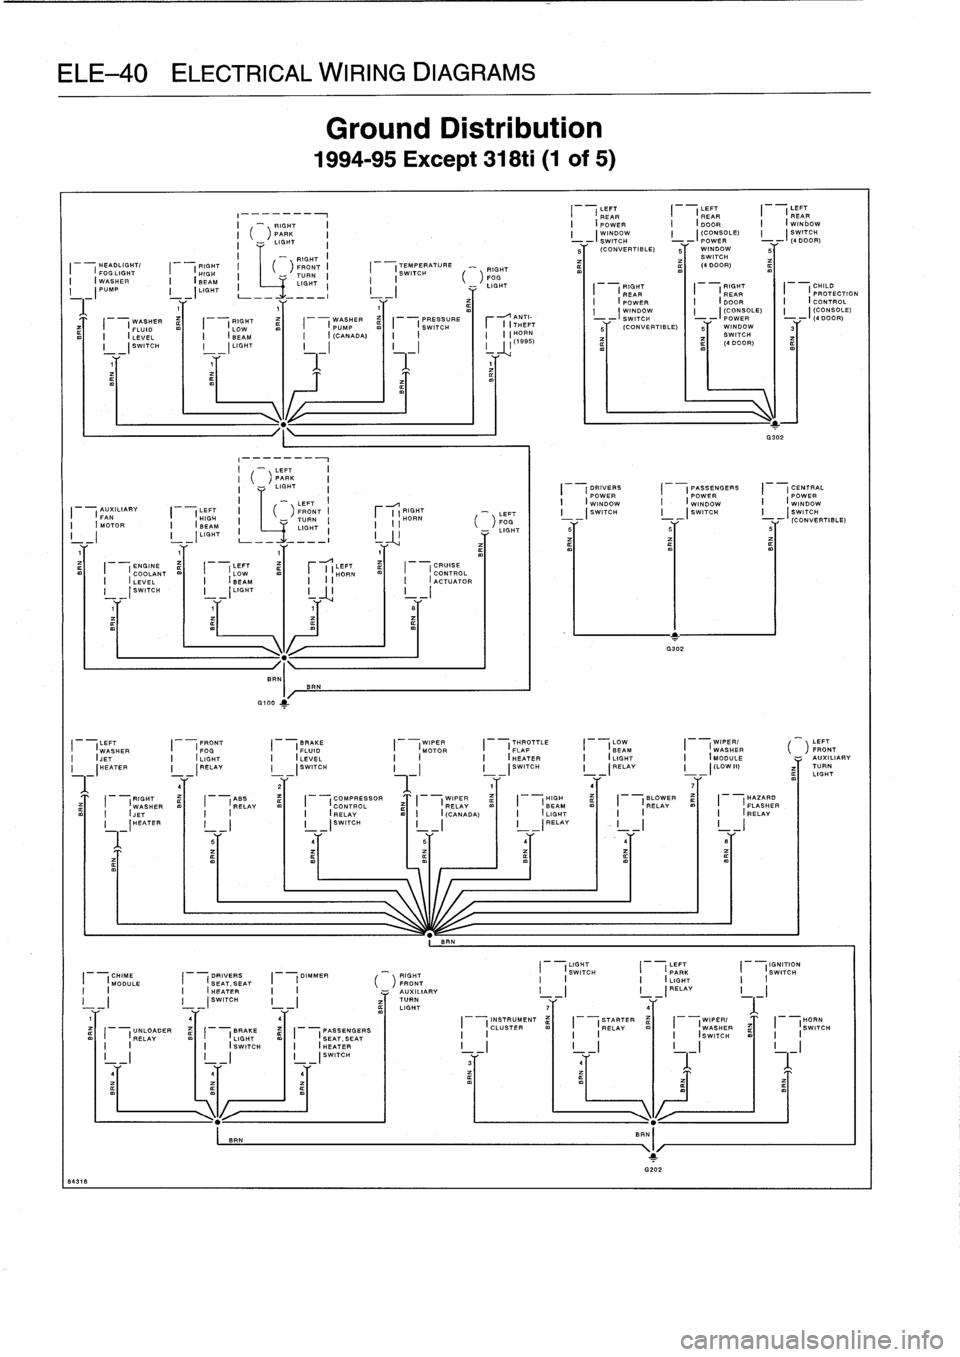 BMW 328i 1994 E36 Workshop Manual 
ELE-40
ELECTRICAL
WIRING
DIAGRAMS

RIGHTHEADLIGHT/

	

RIGHT
I

	

FRONT
I

	

FOG
LIGHT

	

I

	

HIGH

	

I

	

TURN
I

	

I
WASHER

	

I

	

I
BEAM

	

LIGHT
I
(PUMP

	

I
(LIGHT
,
L-
1

	

1

	

